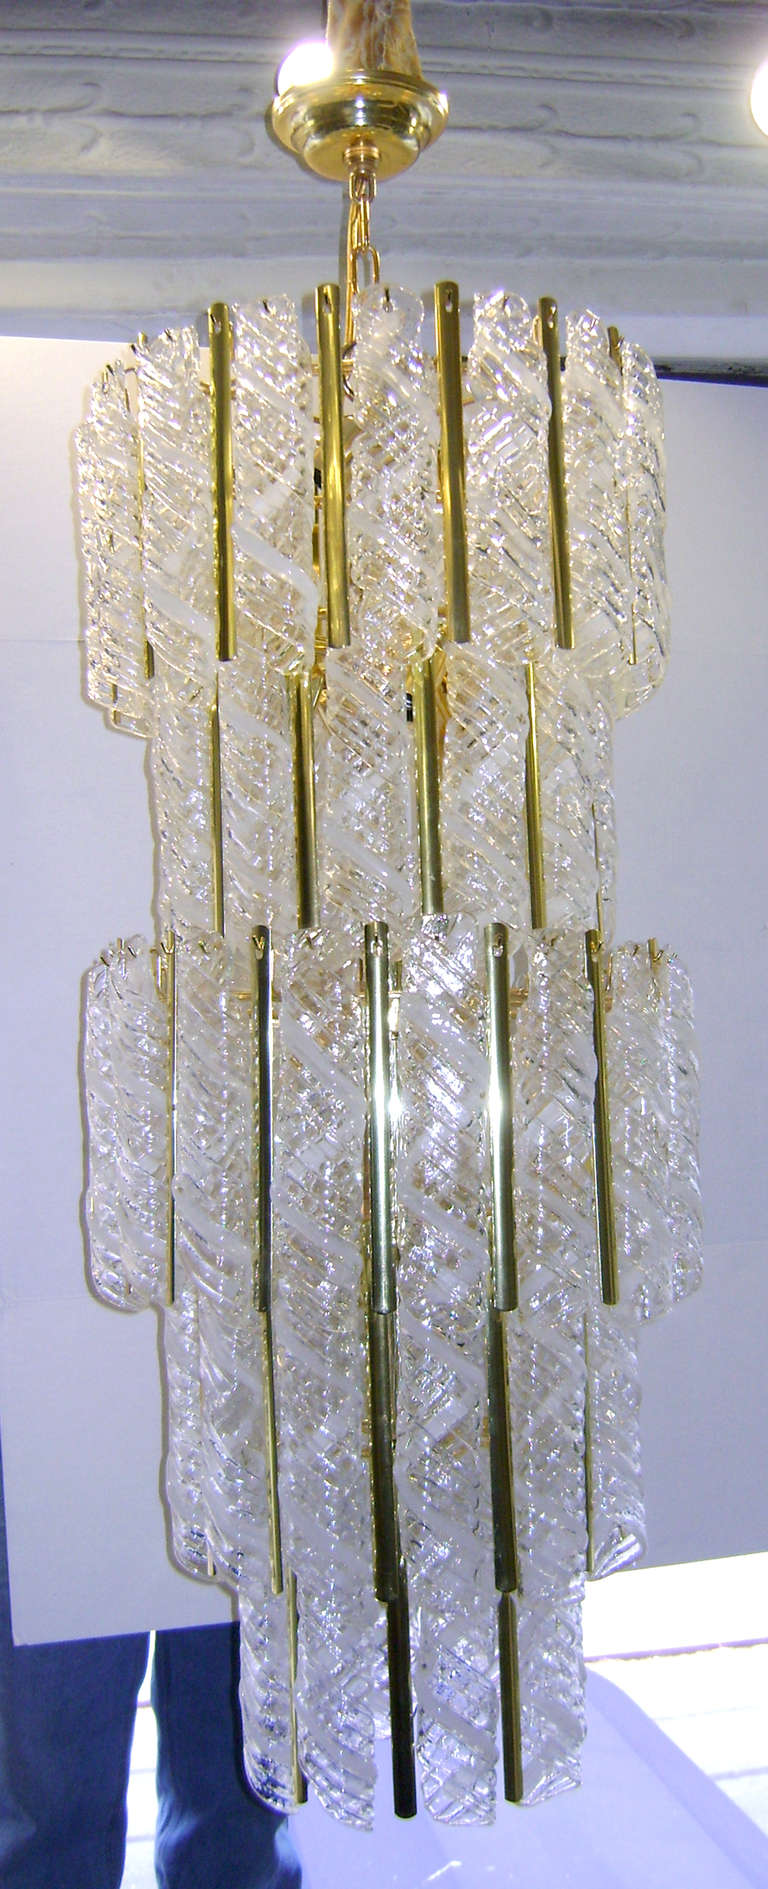 A circa 1960 Italian blown glass chandelier with 16 interior lights. Each individual glass piece in twirled design and with clear and white pattern.

Measurements:
Min. drop: 44